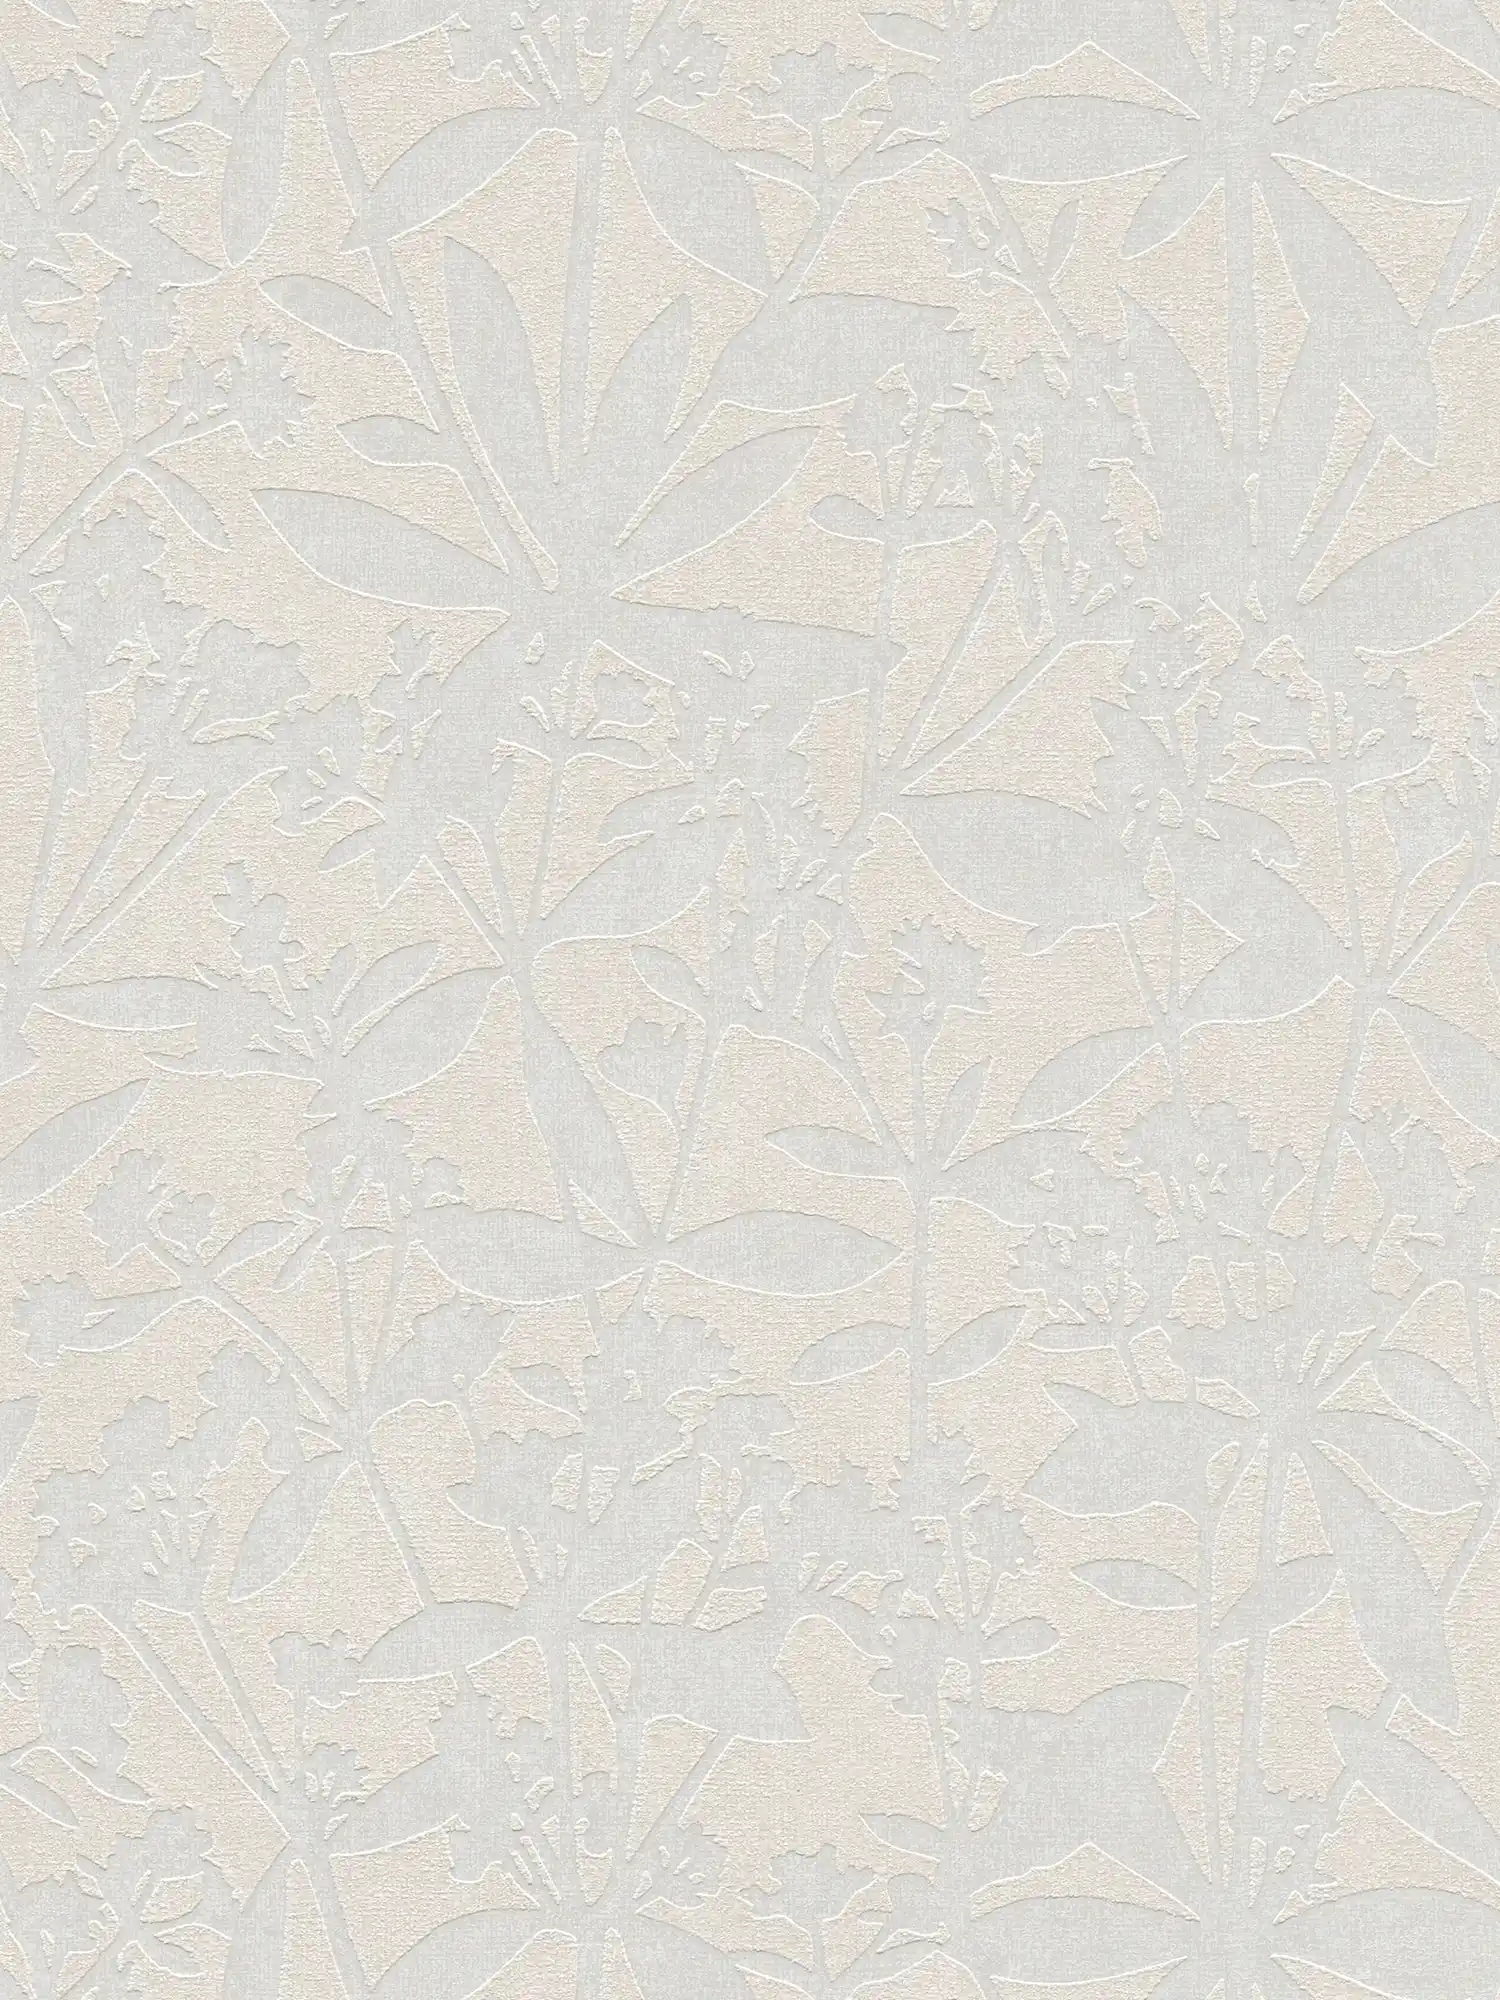 Floral non-woven wallpaper with flowers textured pattern - cream, white
